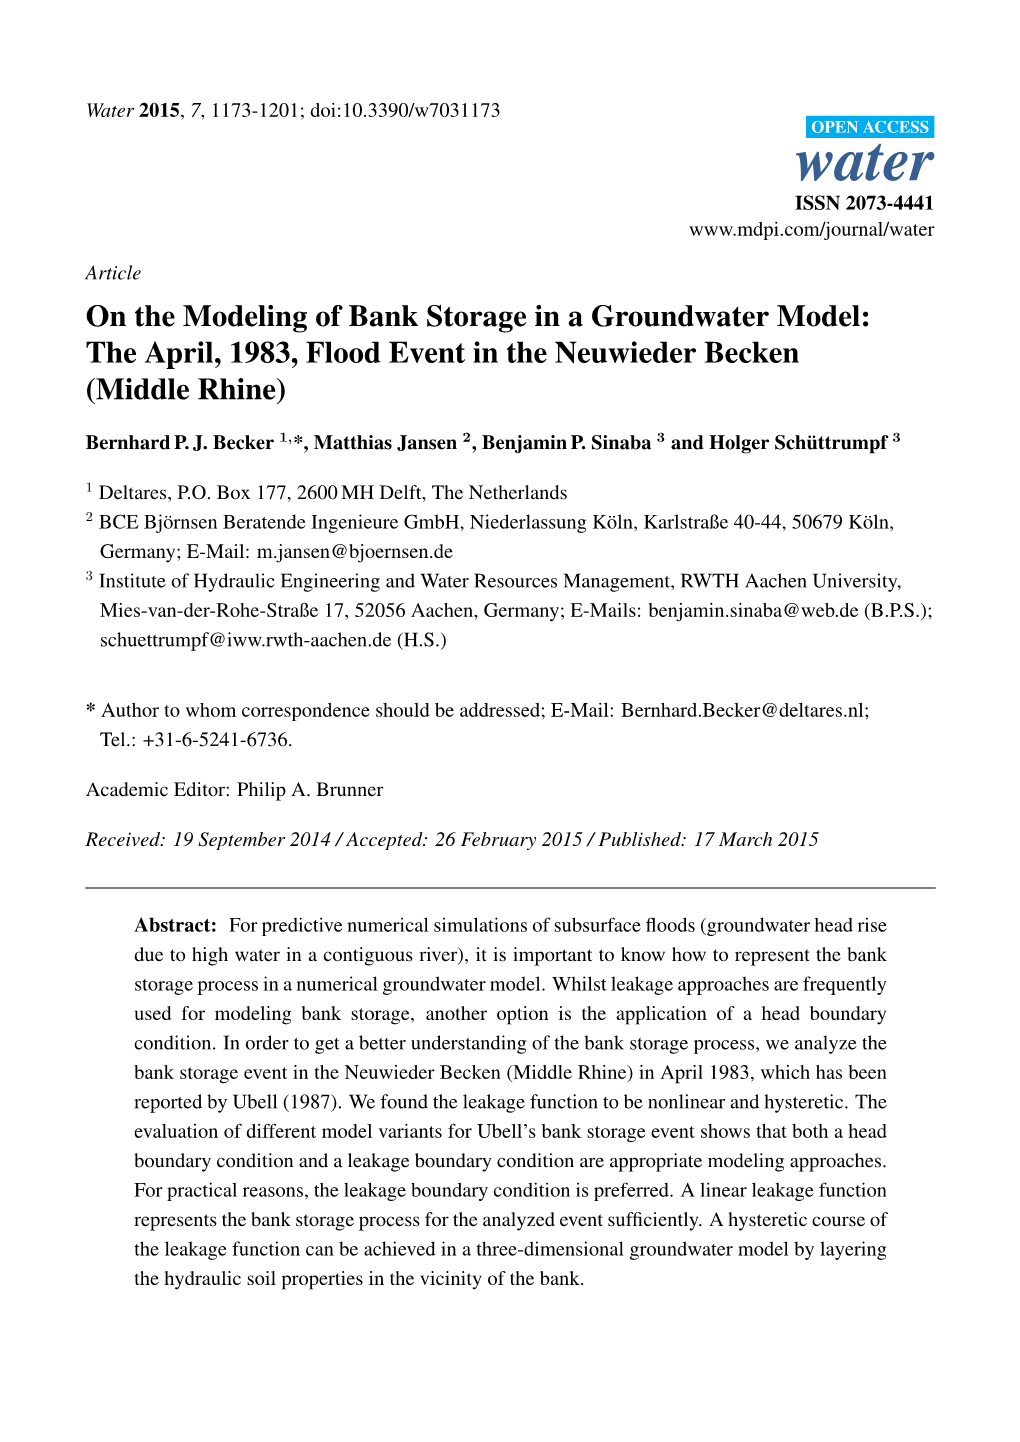 On the Modeling of Bank Storage in a Groundwater Model: the April, 1983, Flood Event in the Neuwieder Becken (Middle Rhine)